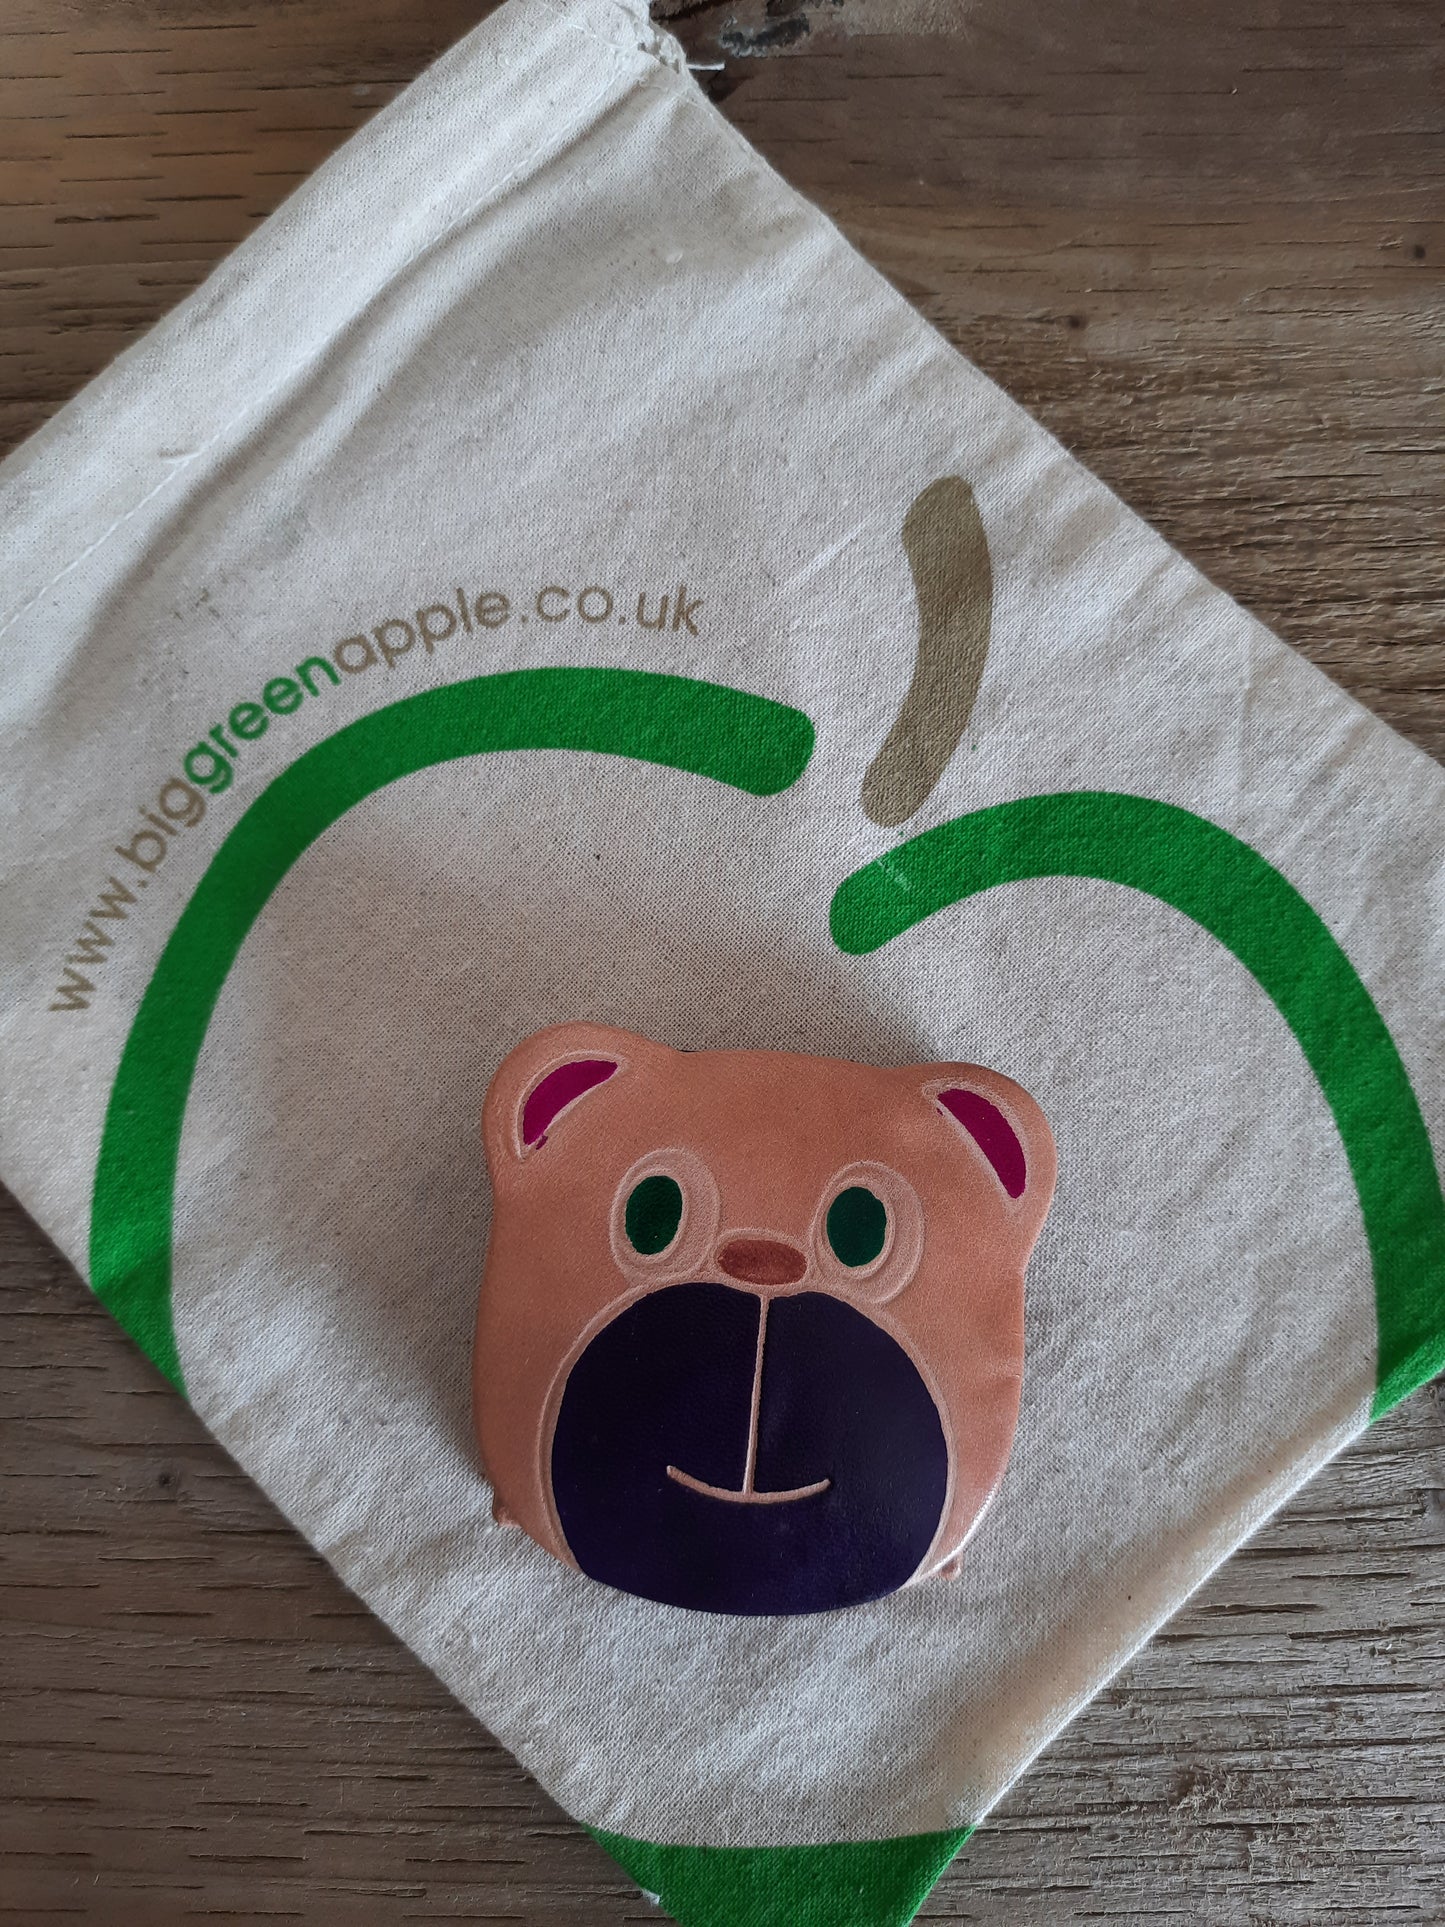 Fair Trade Purse | Leather | Cute Piggy | Ethical Presents | Sustainable Company | Gift Ideas